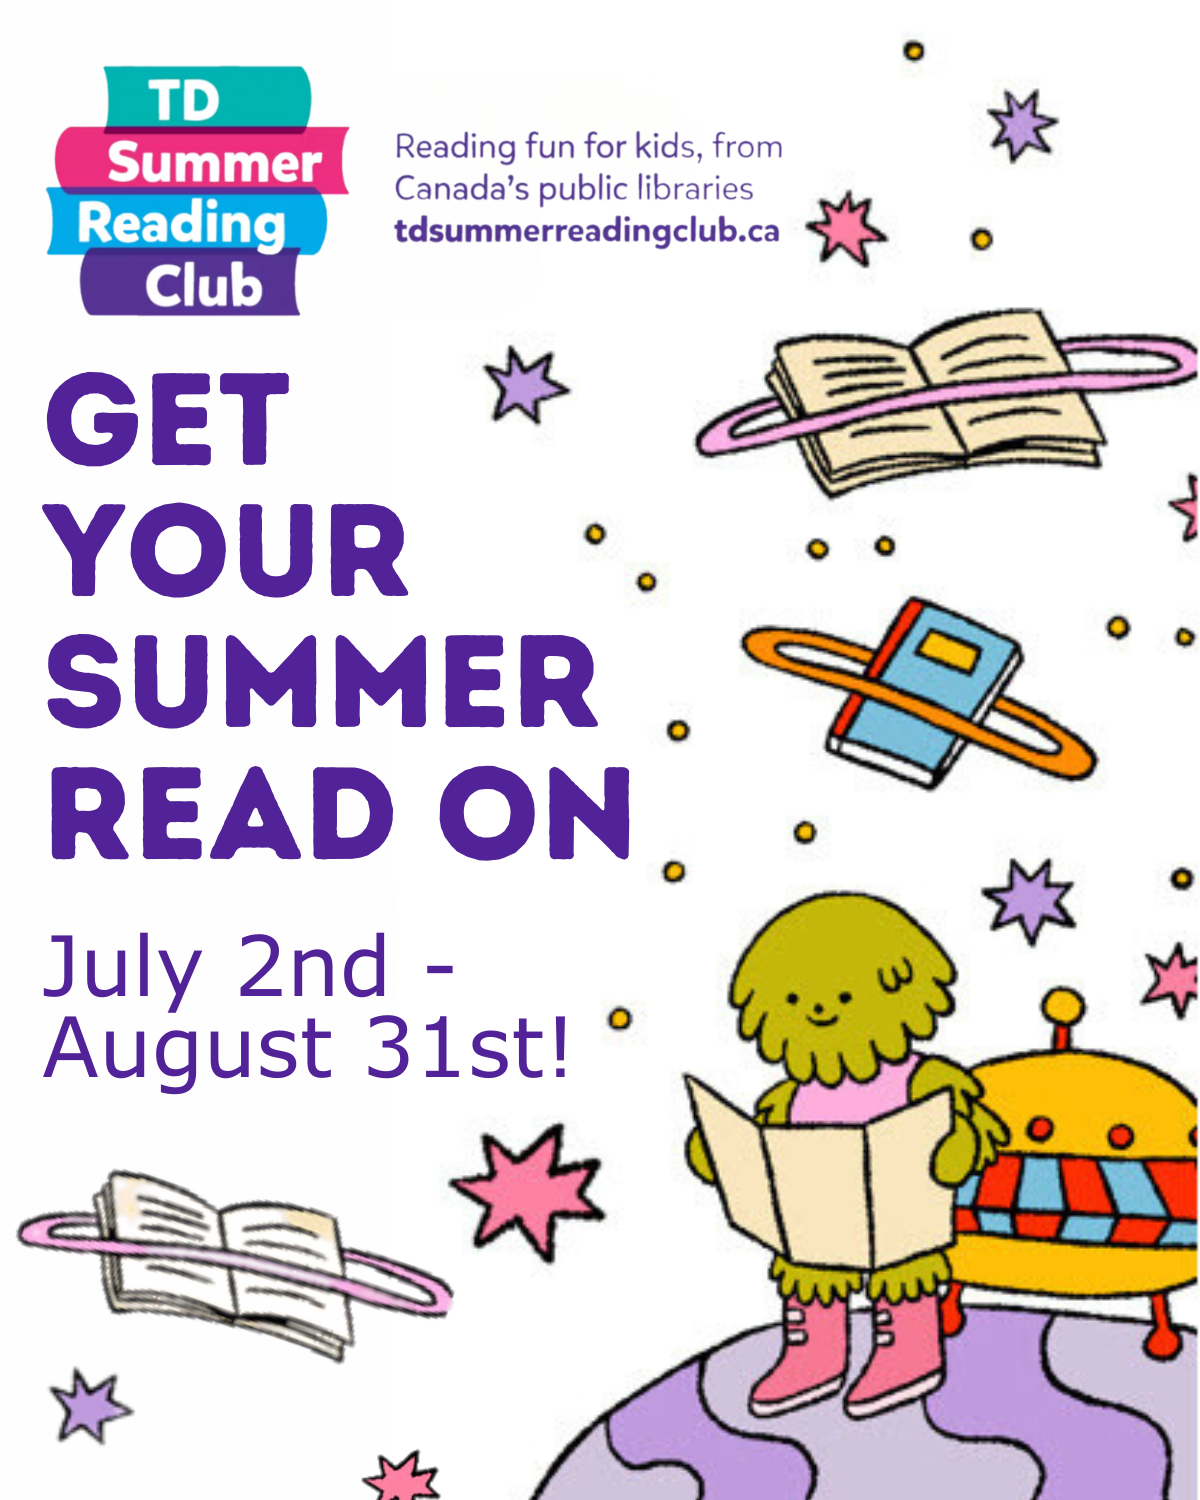 Image has cartoons of a alien critter on a planet and space planets.Get your summer read on! July 2nd - August 31st